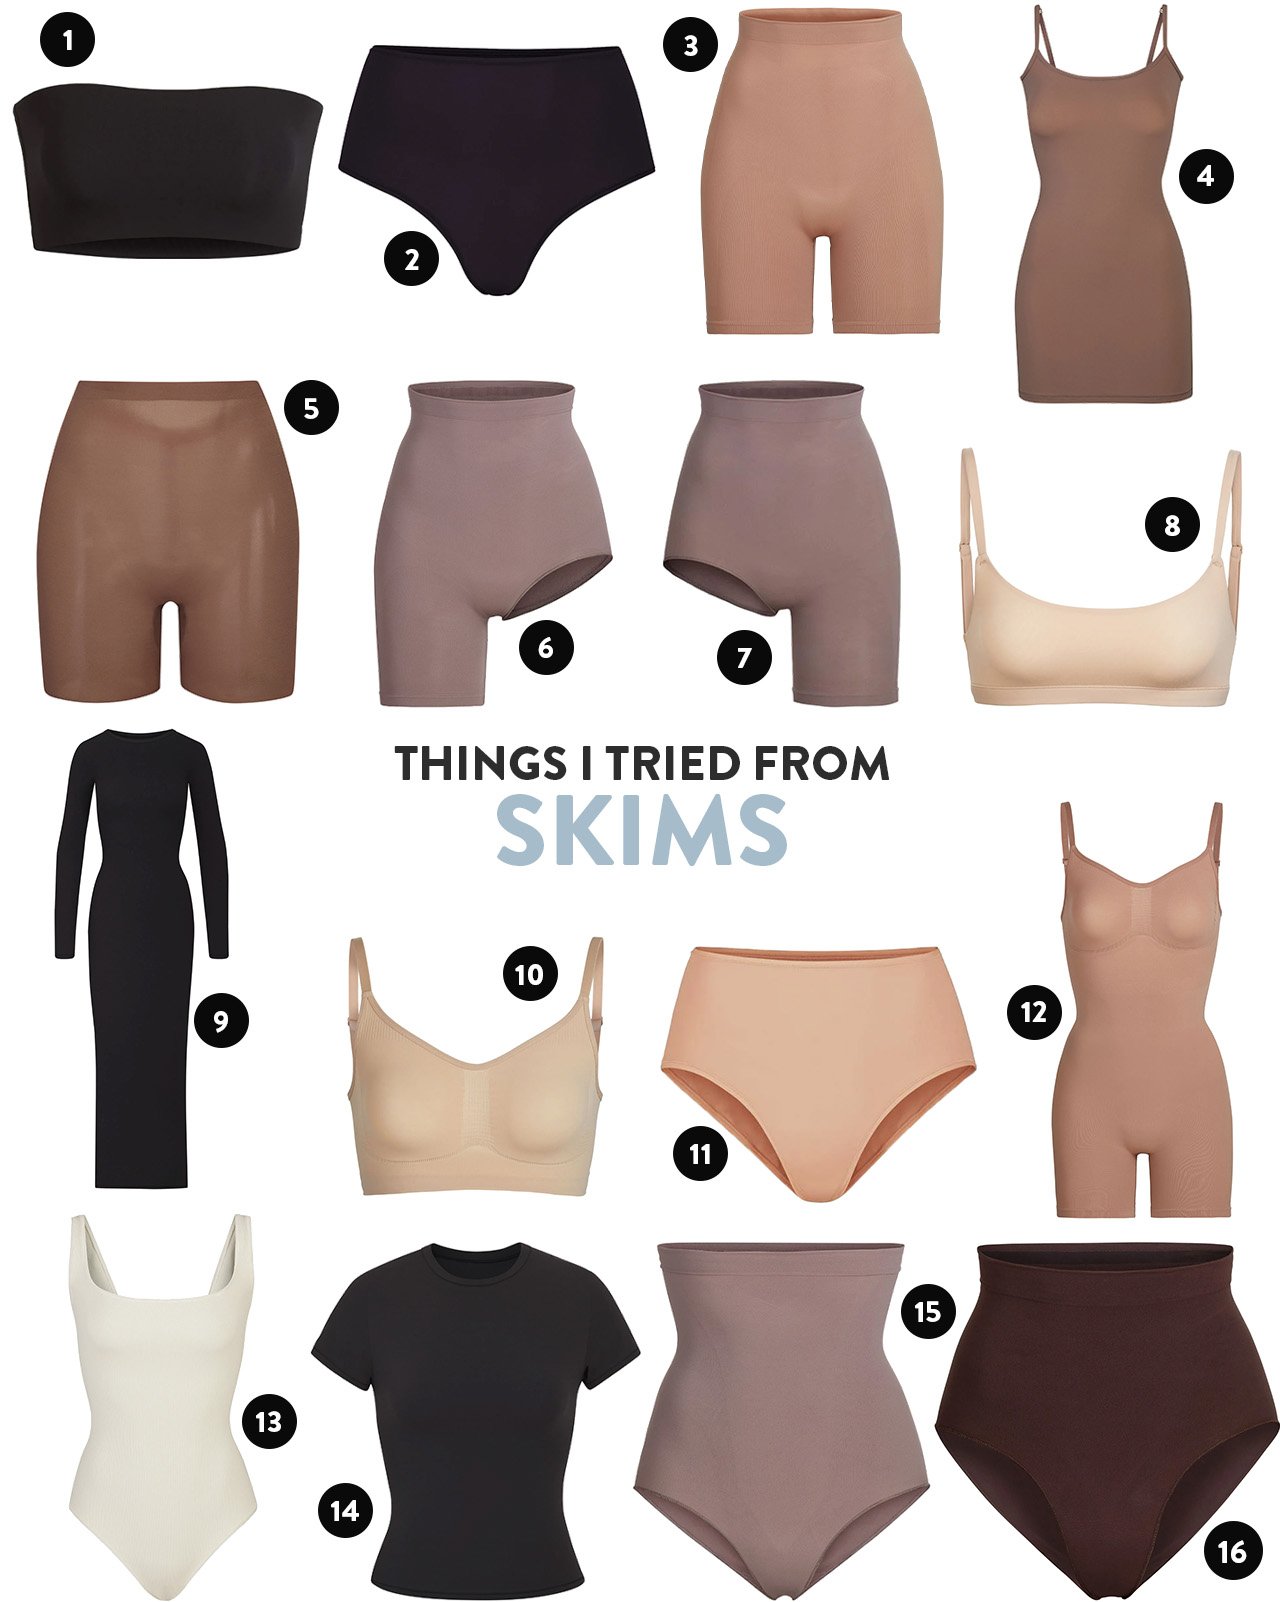 Your SKIMS Panty Shop Guide - SKIMS